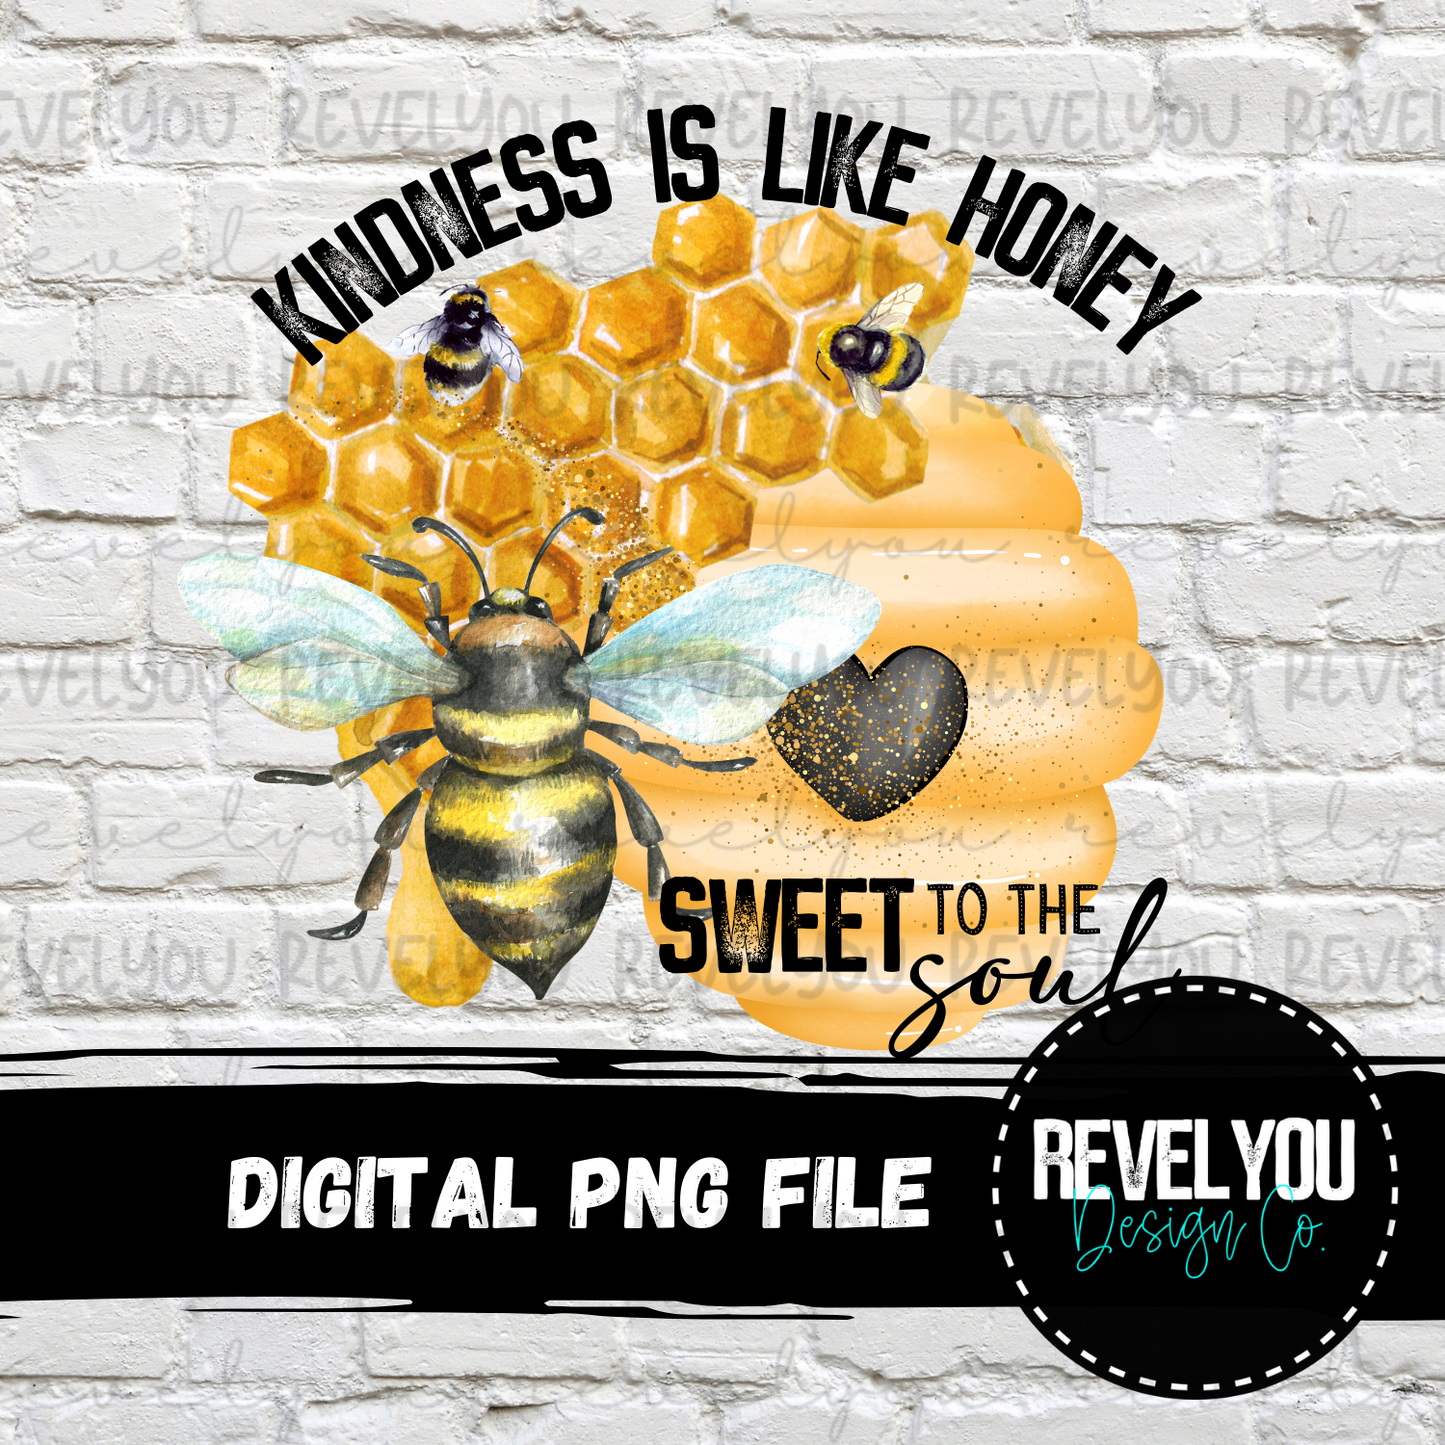 Kindness Is Like Honey, Sweet To The Soul - PNG